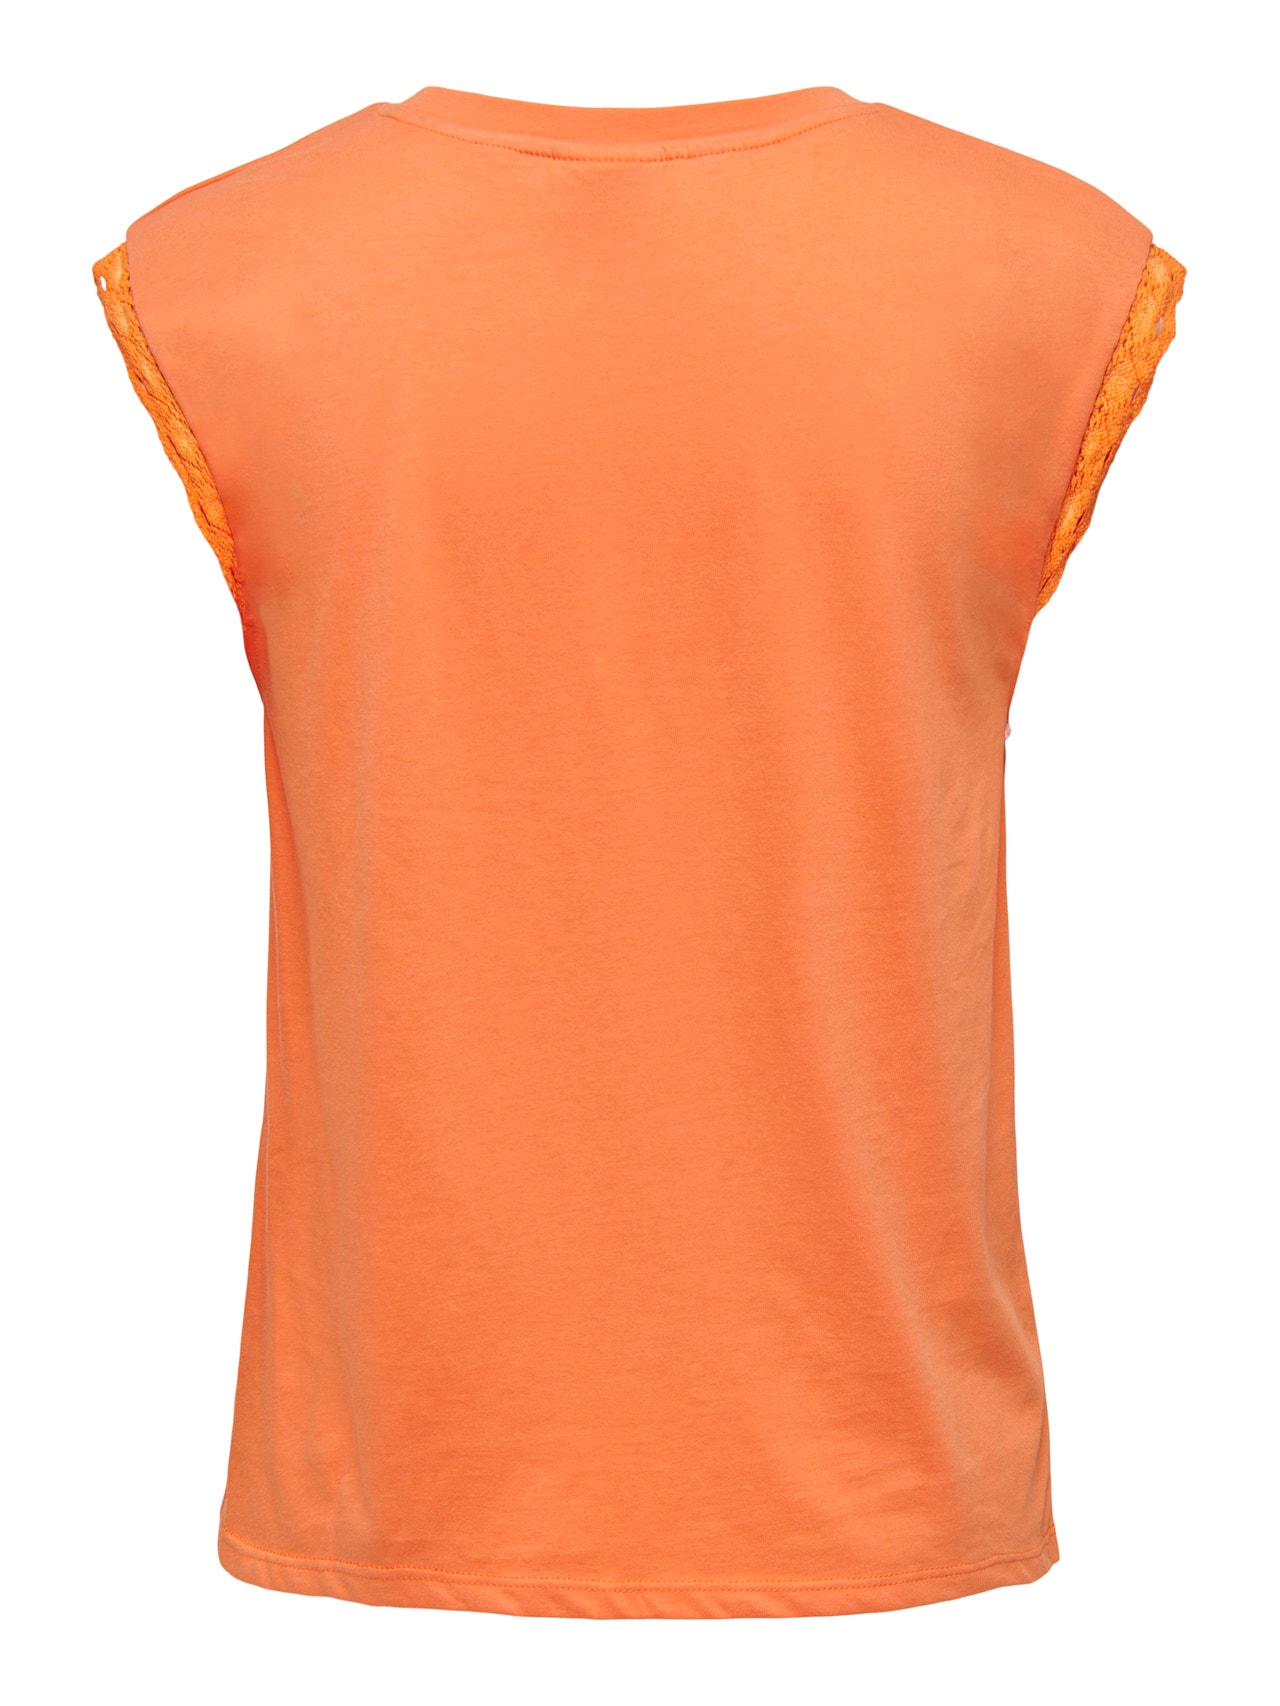 ONLY O-neck top with lace detail -Autumn Sunset - 15295600